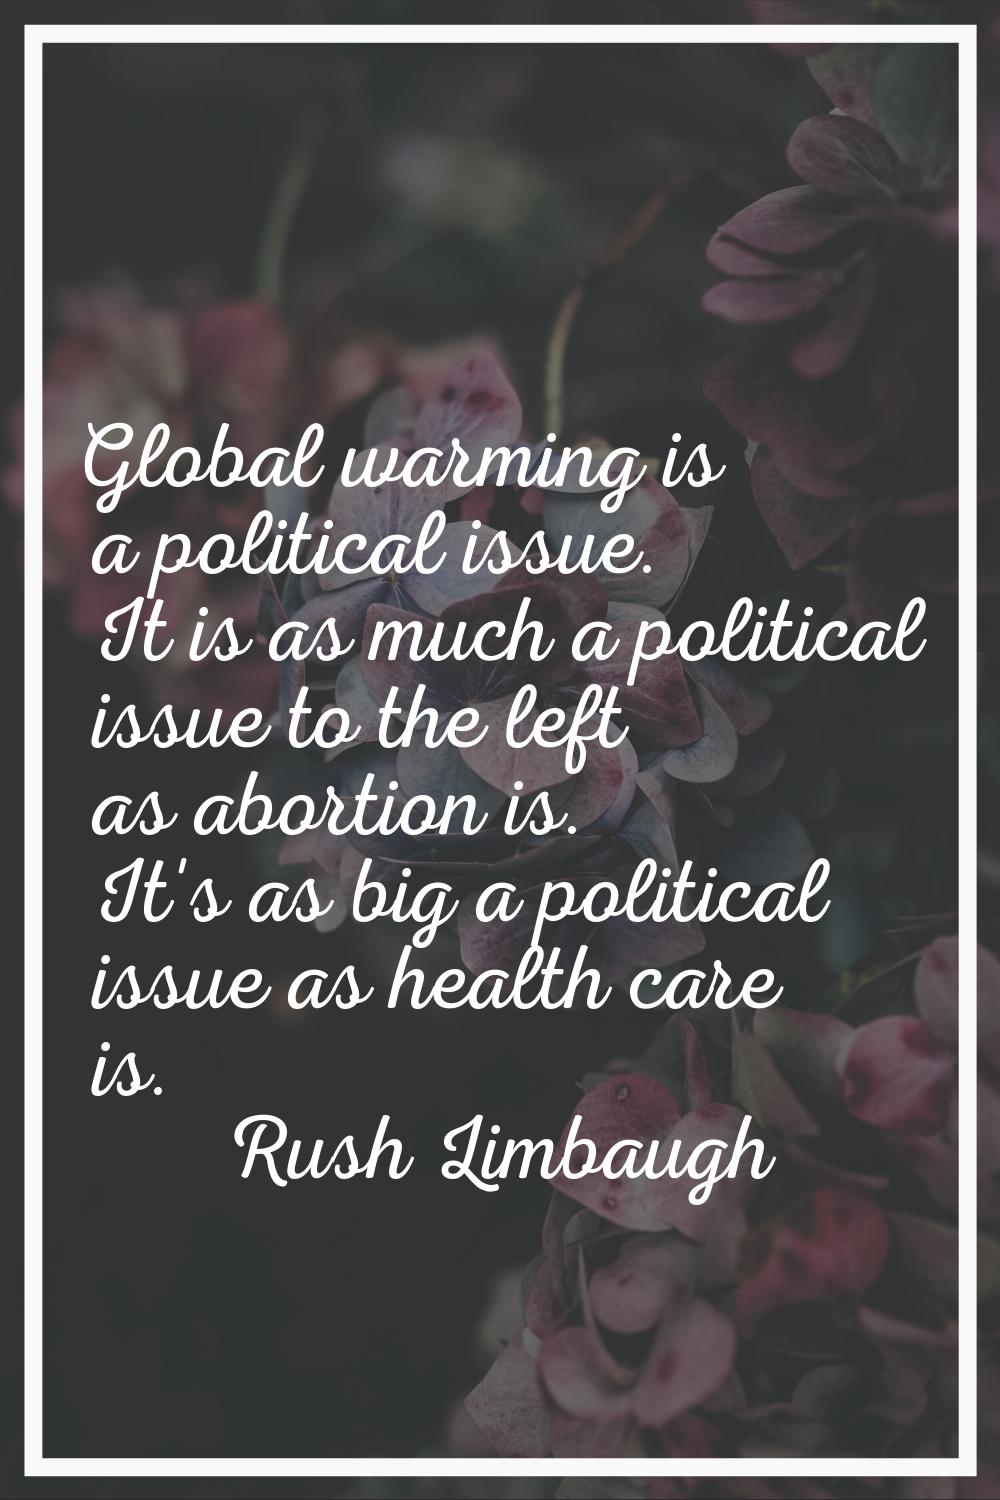 Global warming is a political issue. It is as much a political issue to the left as abortion is. It